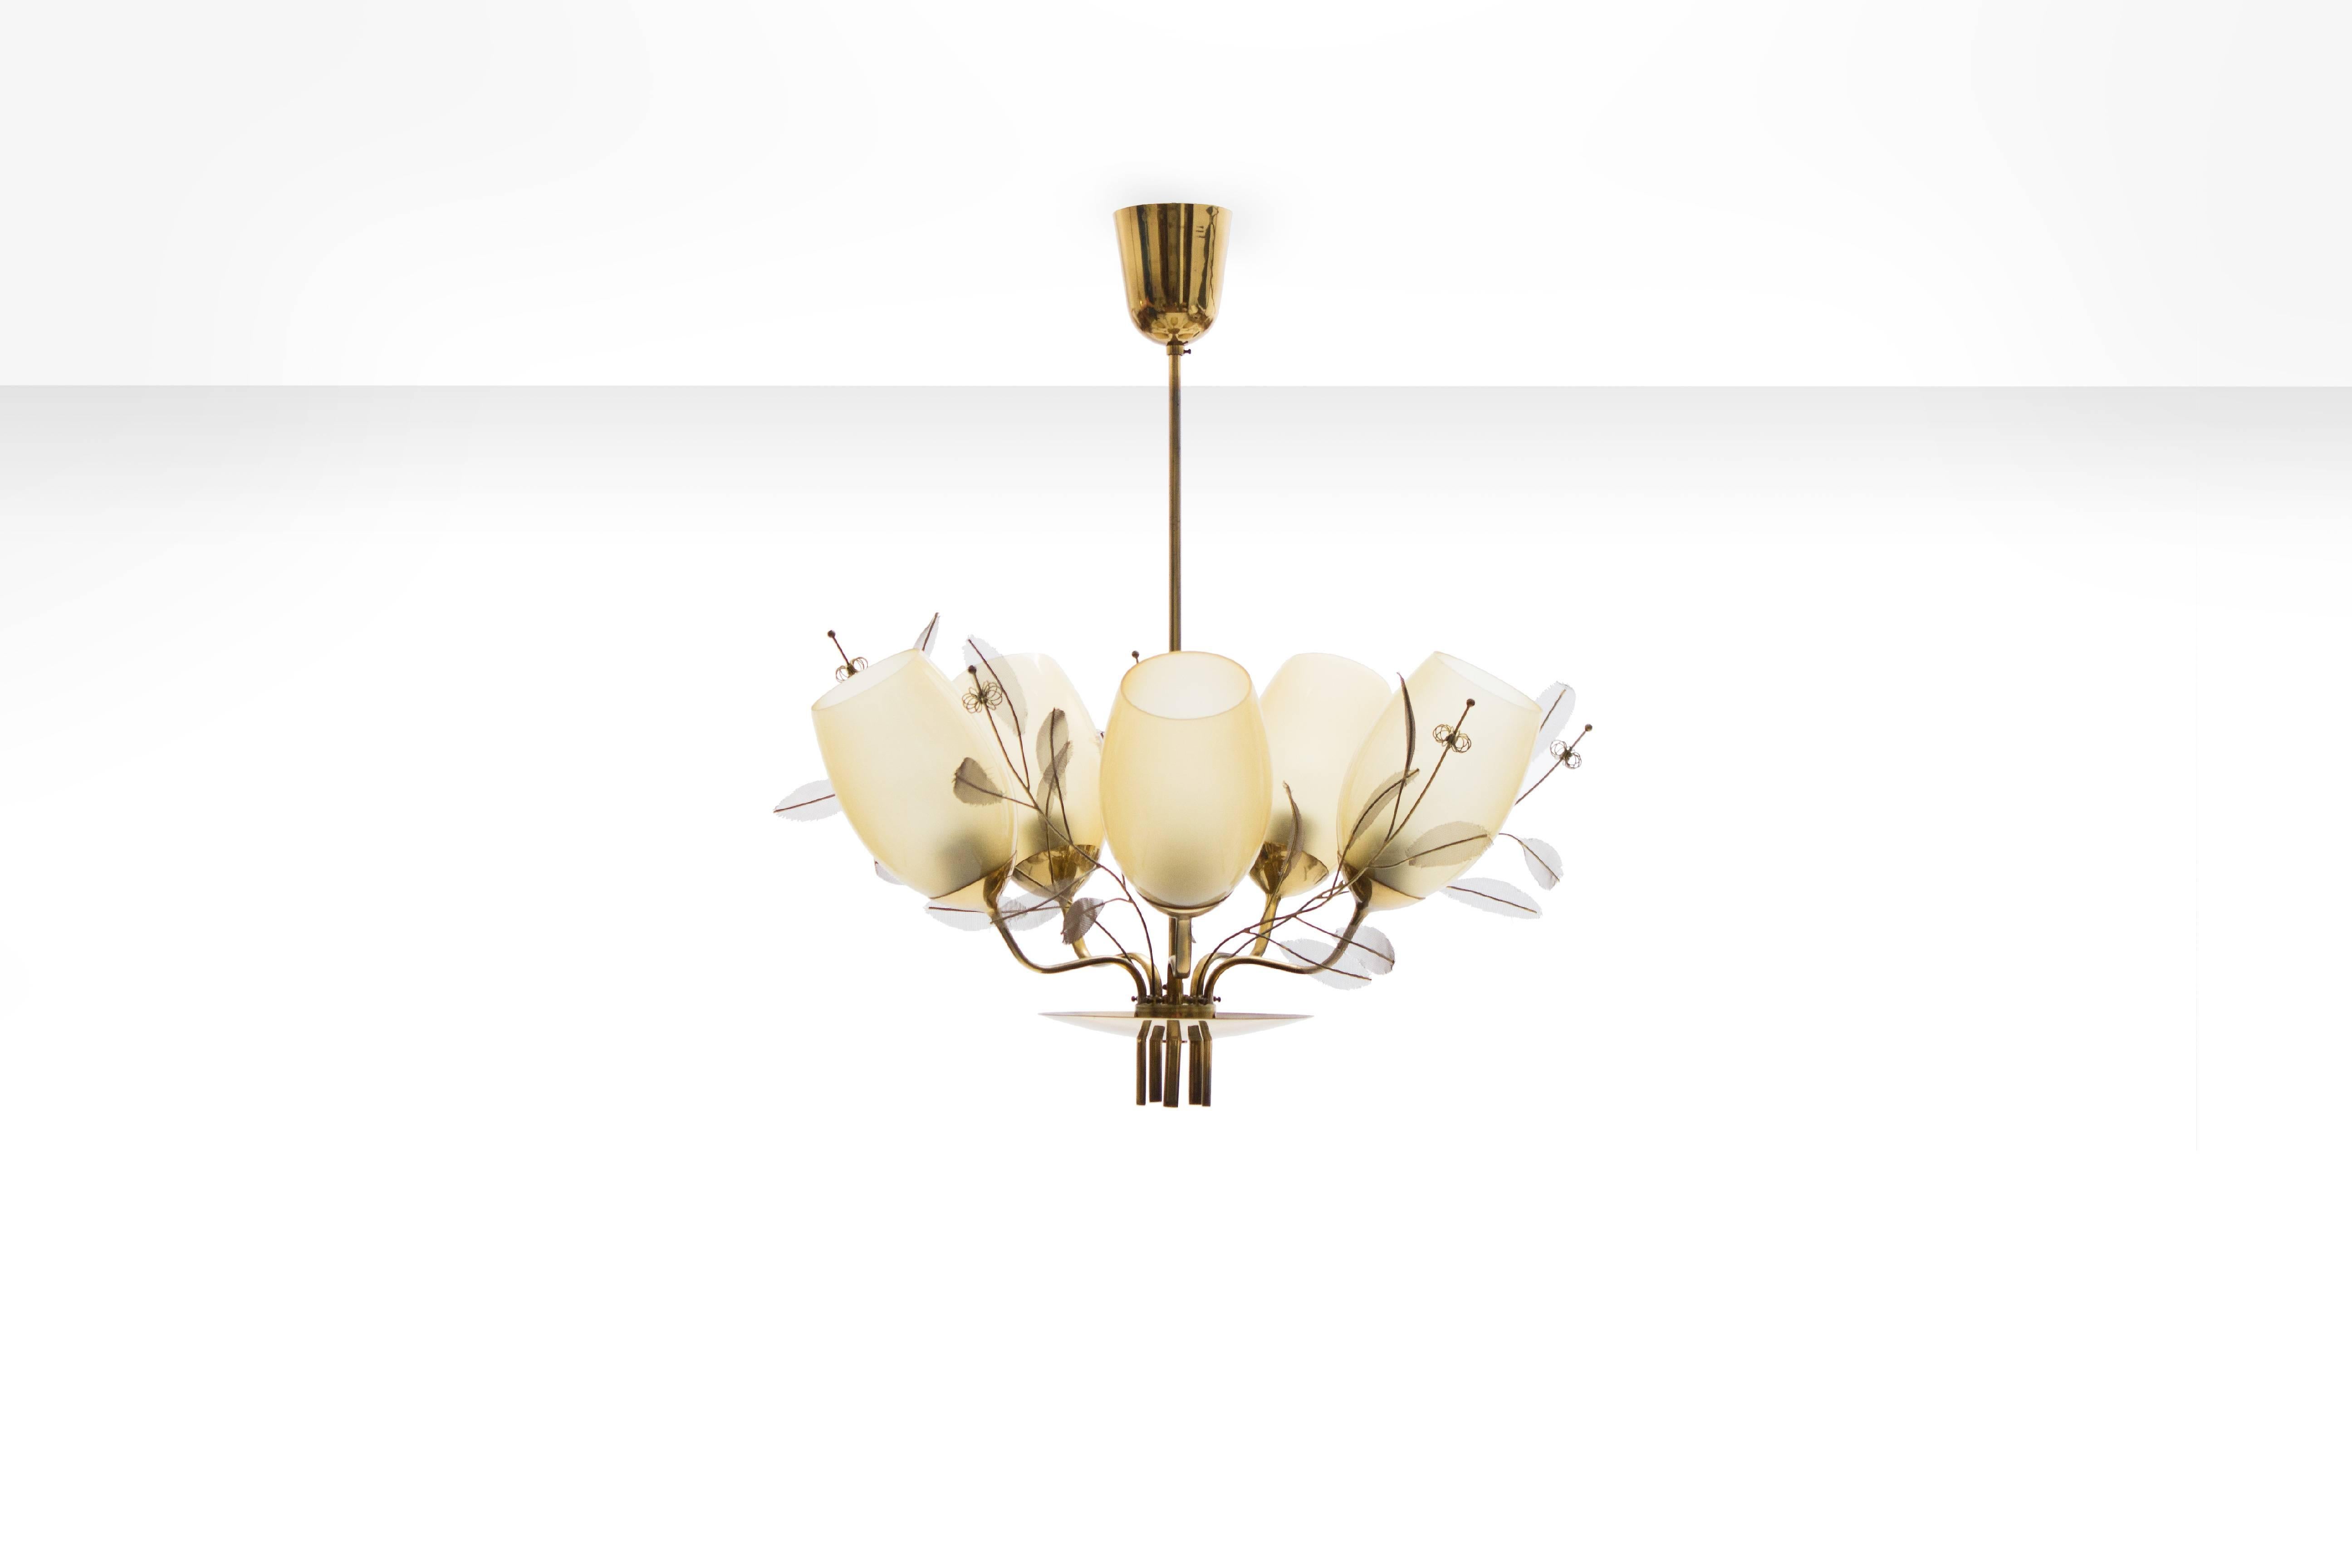 Paavo Tynell five-arm chandelier for Taito Oy - Model 9029/5, Finland 1950s

This chandelier from the 'Concerto' series, also known as the “Bridal Bouquet” chandelier, consists out of five lampshades in opaline glass on a brass frame decorated